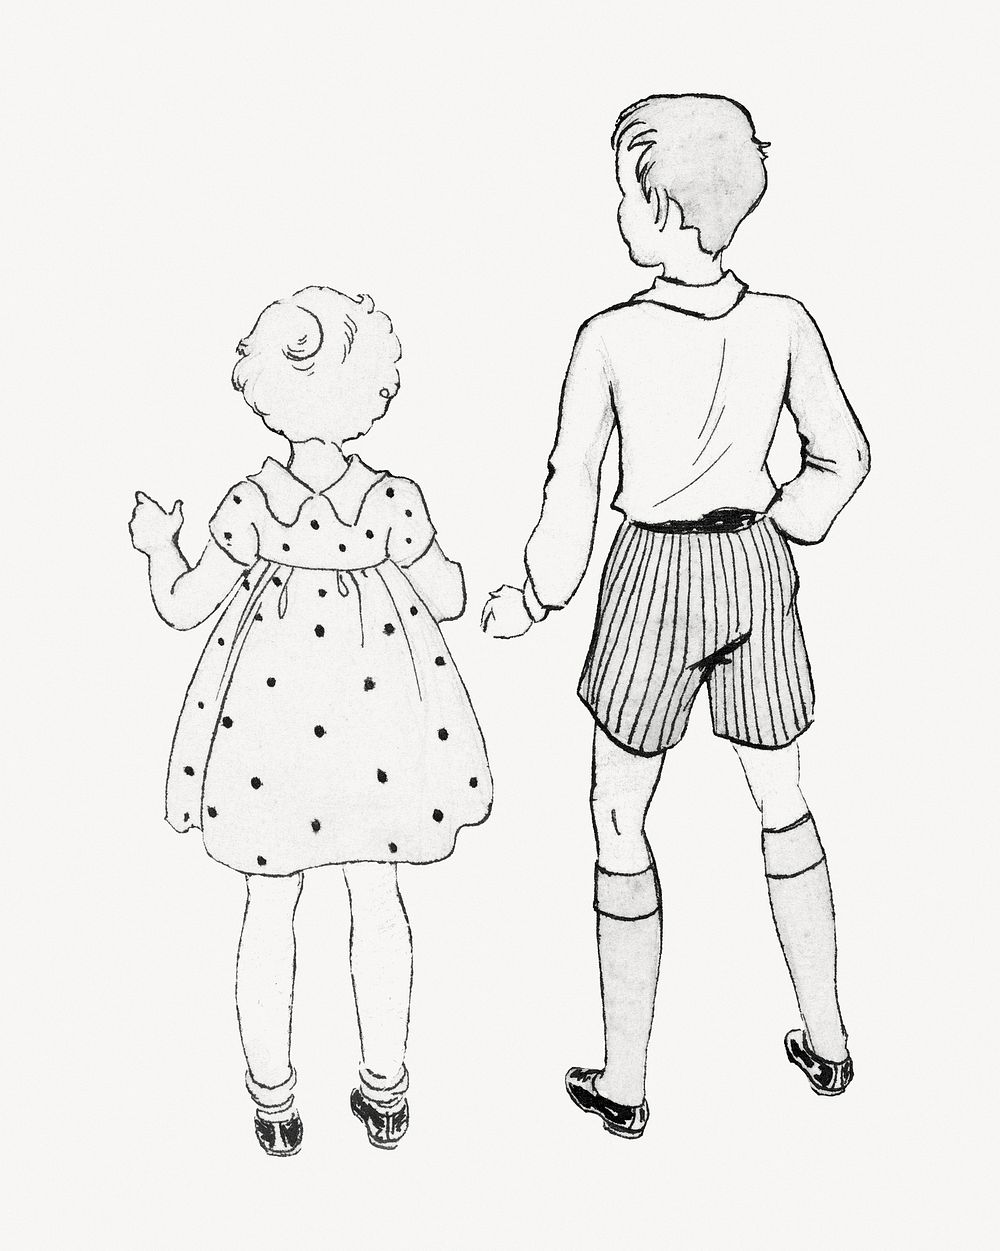 Boy and girl siblings drawing.   Remastered by rawpixel